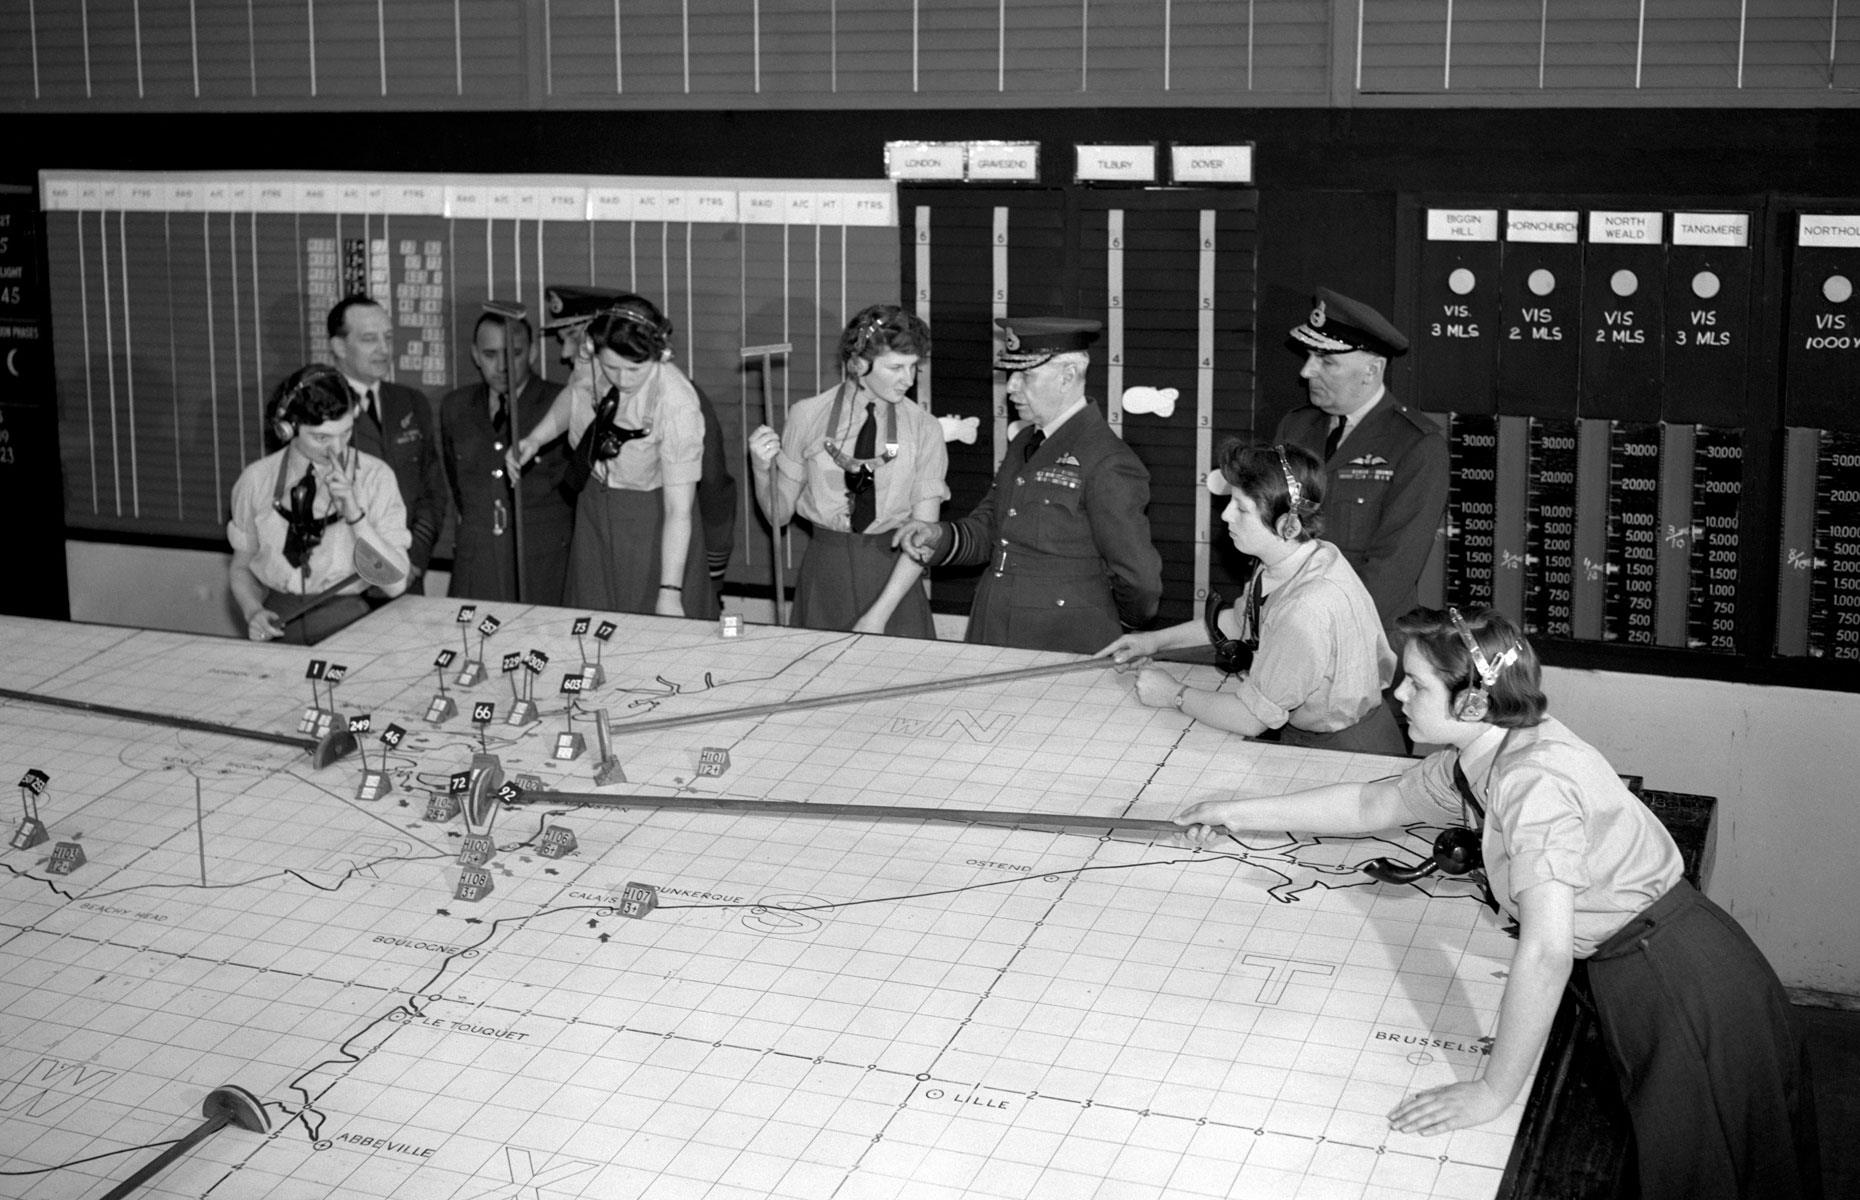 <p>A hive of activity, the Plotting Room was where members of the Women's Auxiliary Air Force (WAAF) tracked incoming Nazi raids and friendly aircraft positions on the supersized plotting table. Meanwhile, RAF officials coordinated squadron movements with the help of a tote board and displays showing weather conditions and the location of balloon defenses.</p>